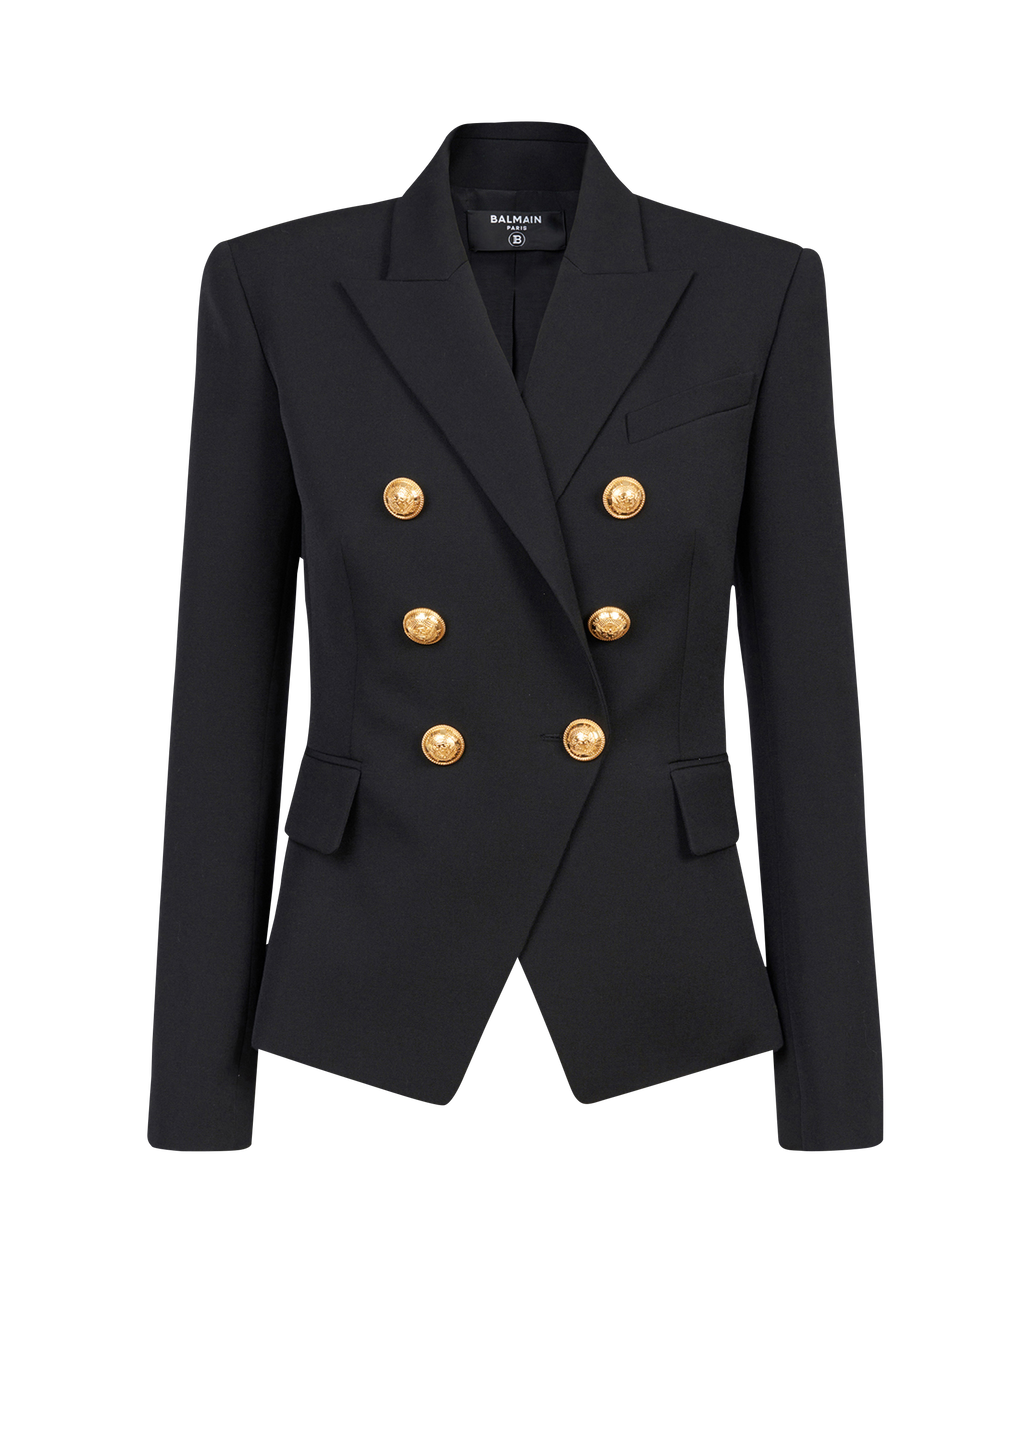 Wool double-breasted jacket, black, hi-res